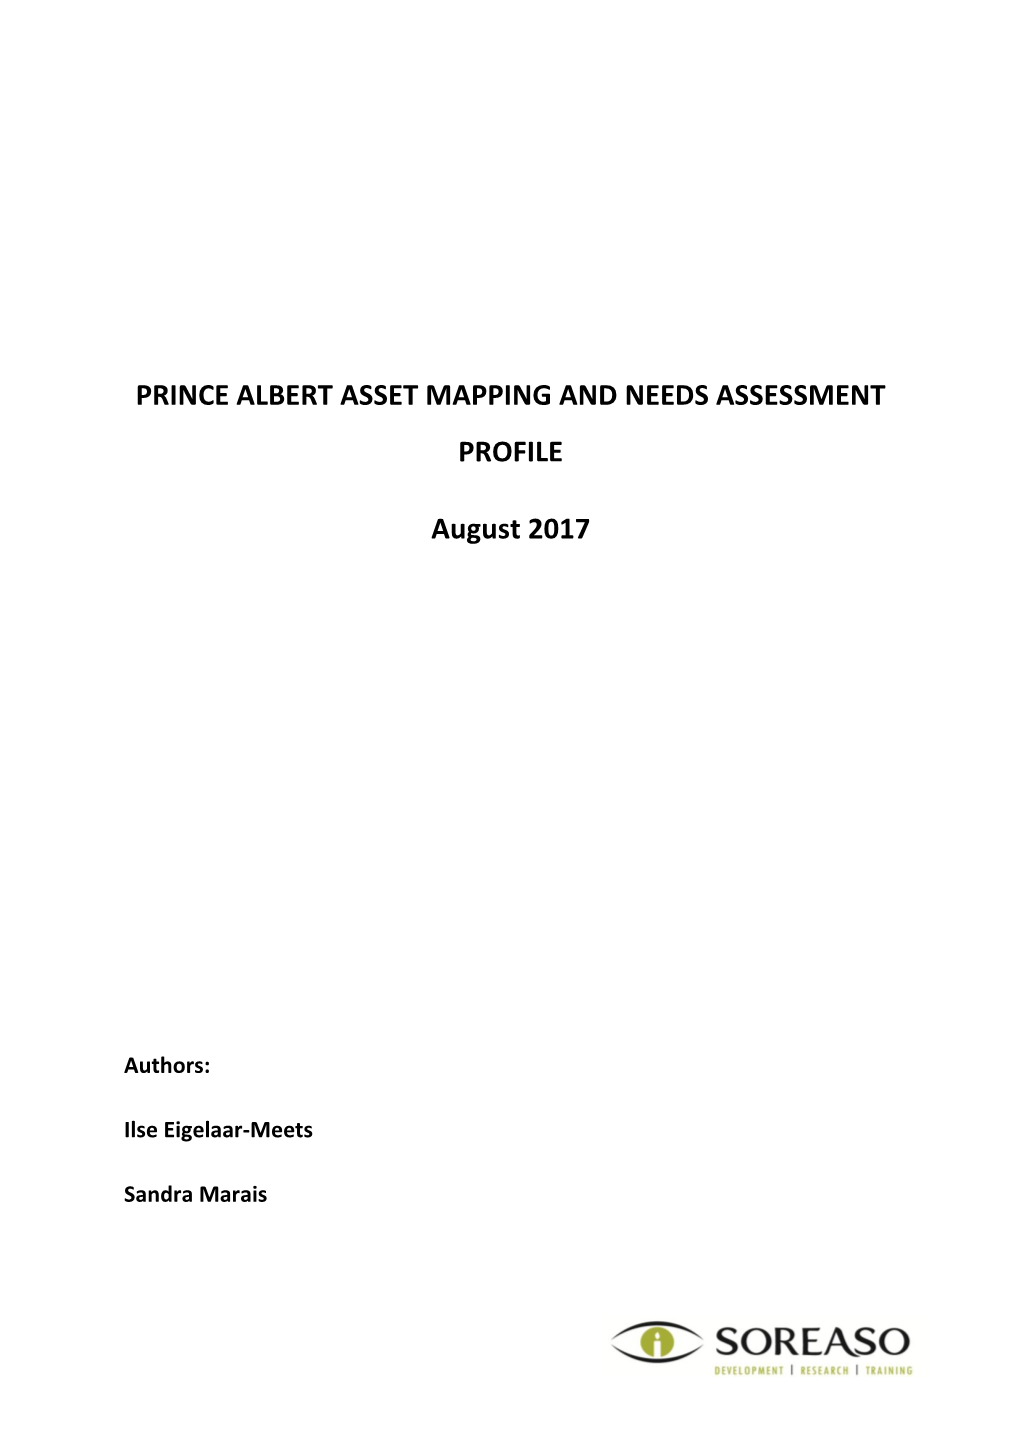 Prince Albert Asset Mapping and Needs Assessment Profile